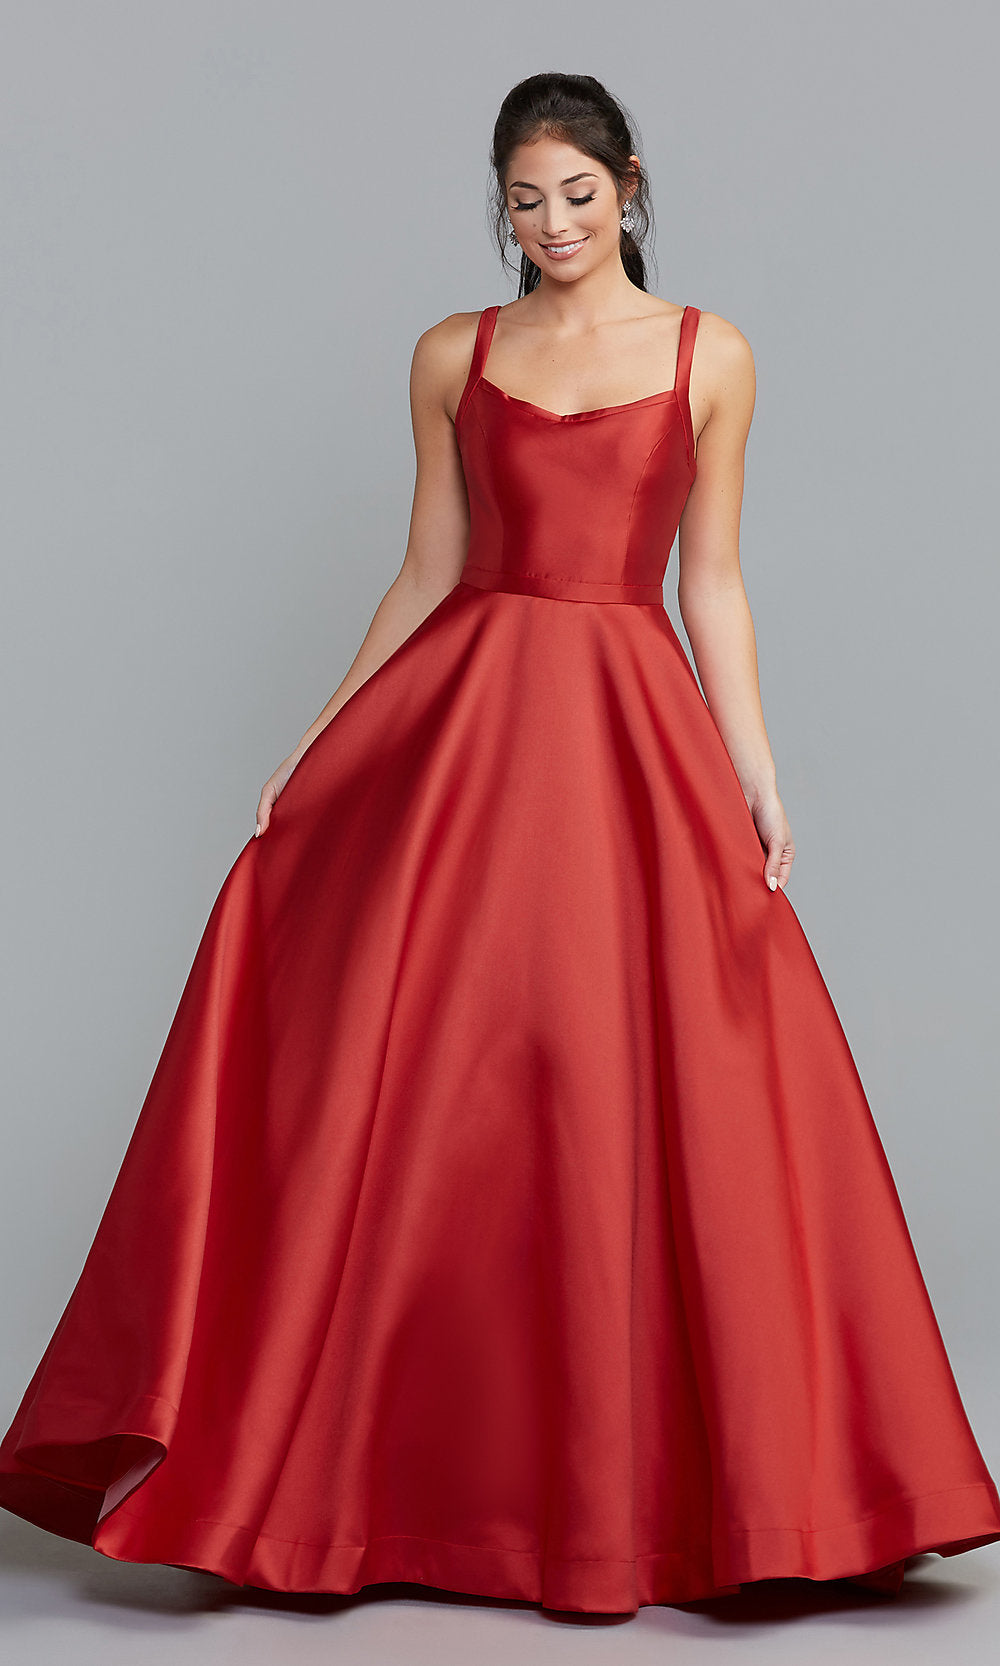  Long Caged-Back A-Line Formal Gown with Pockets